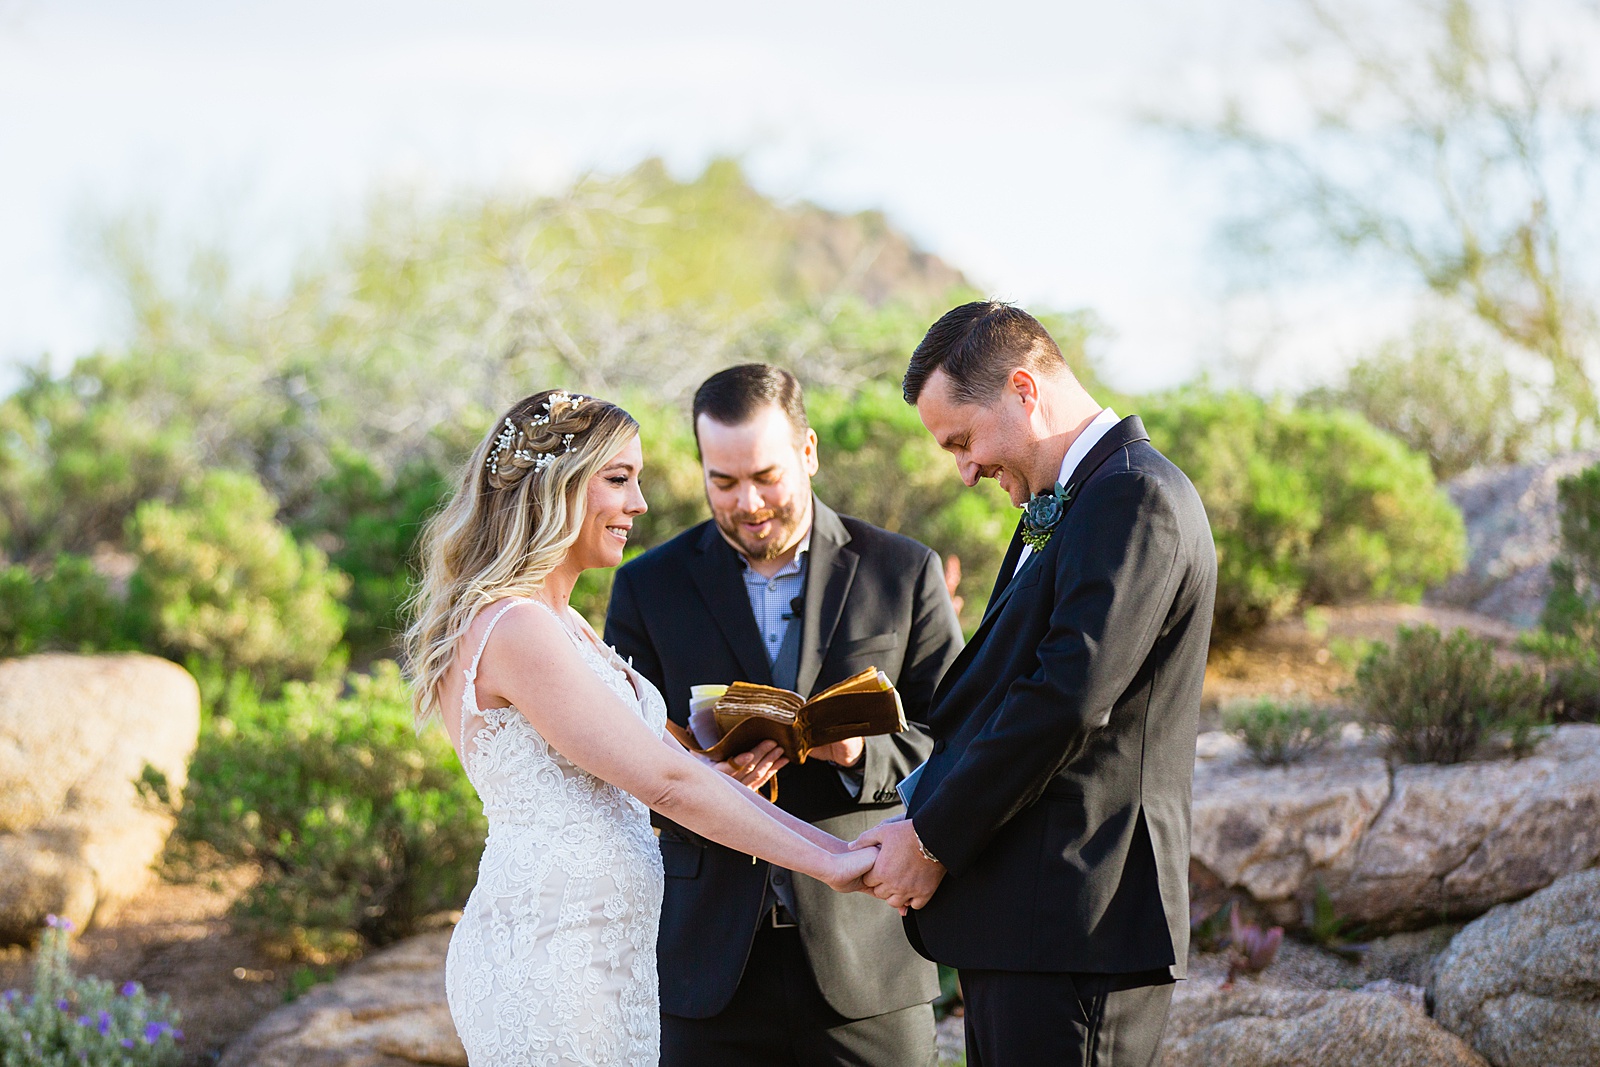 Bride and groom together during Troon North wedding ceremony by Scottsdale wedding photographer PMA Photography.